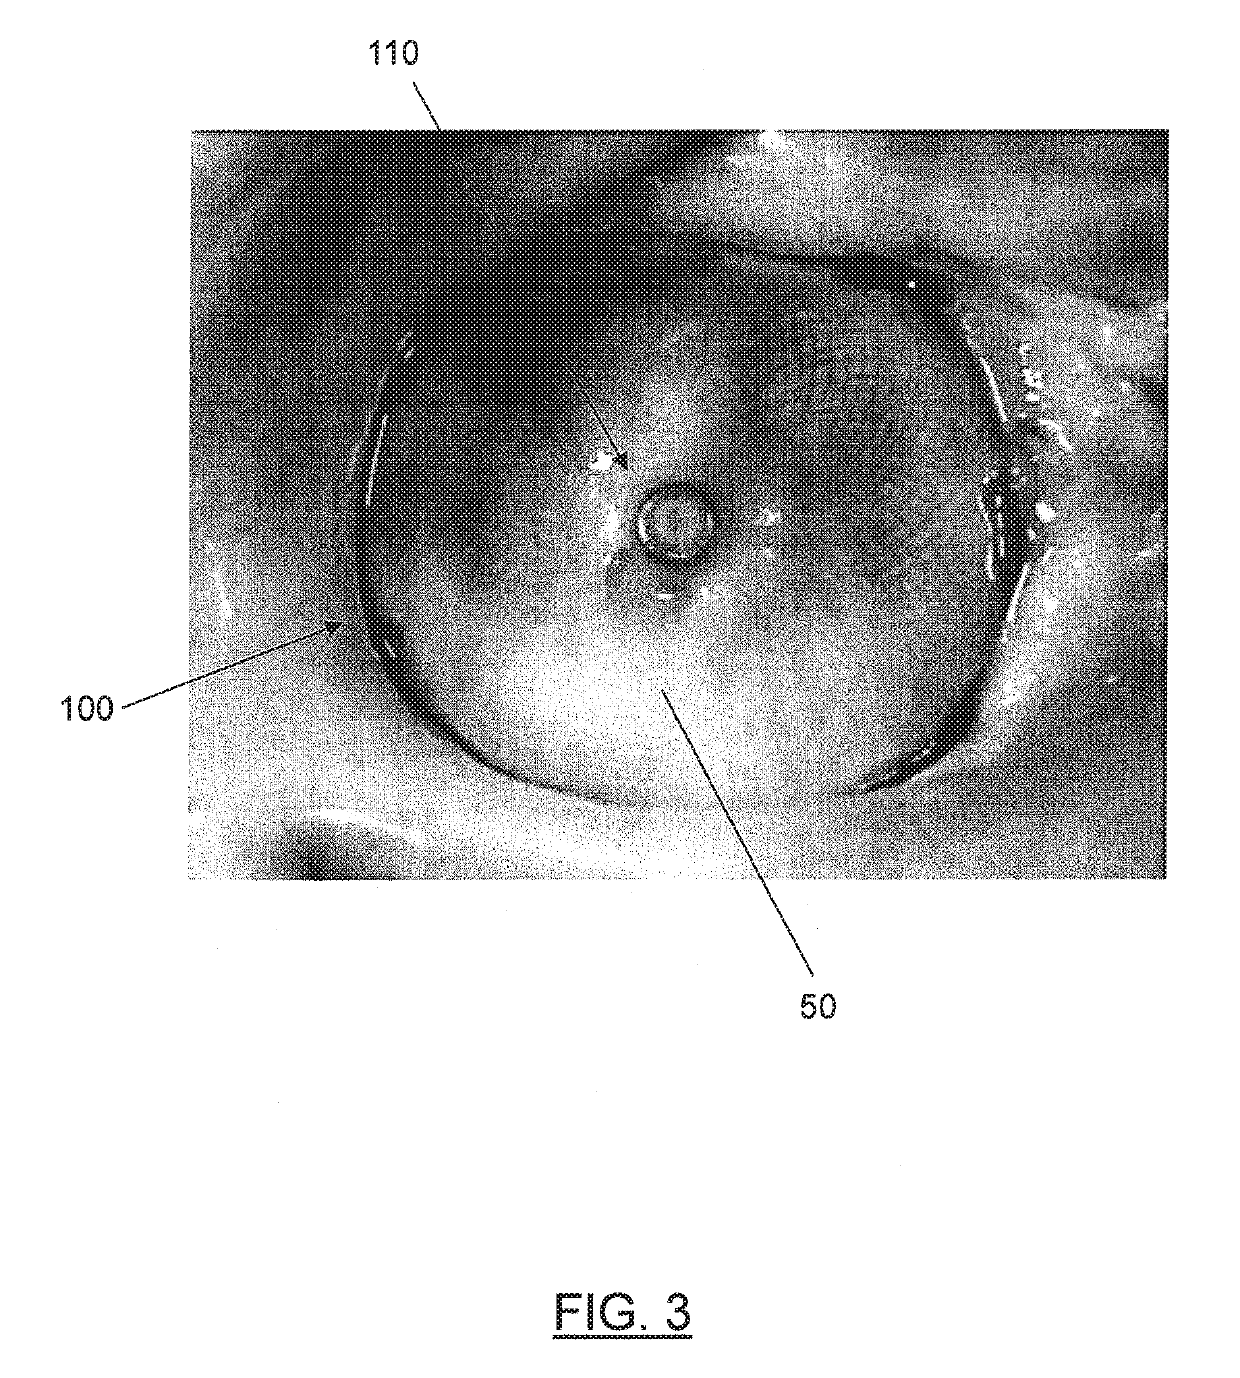 Percutaneous catheter directed intravascular occlusion devices with retractable stabilizing wires